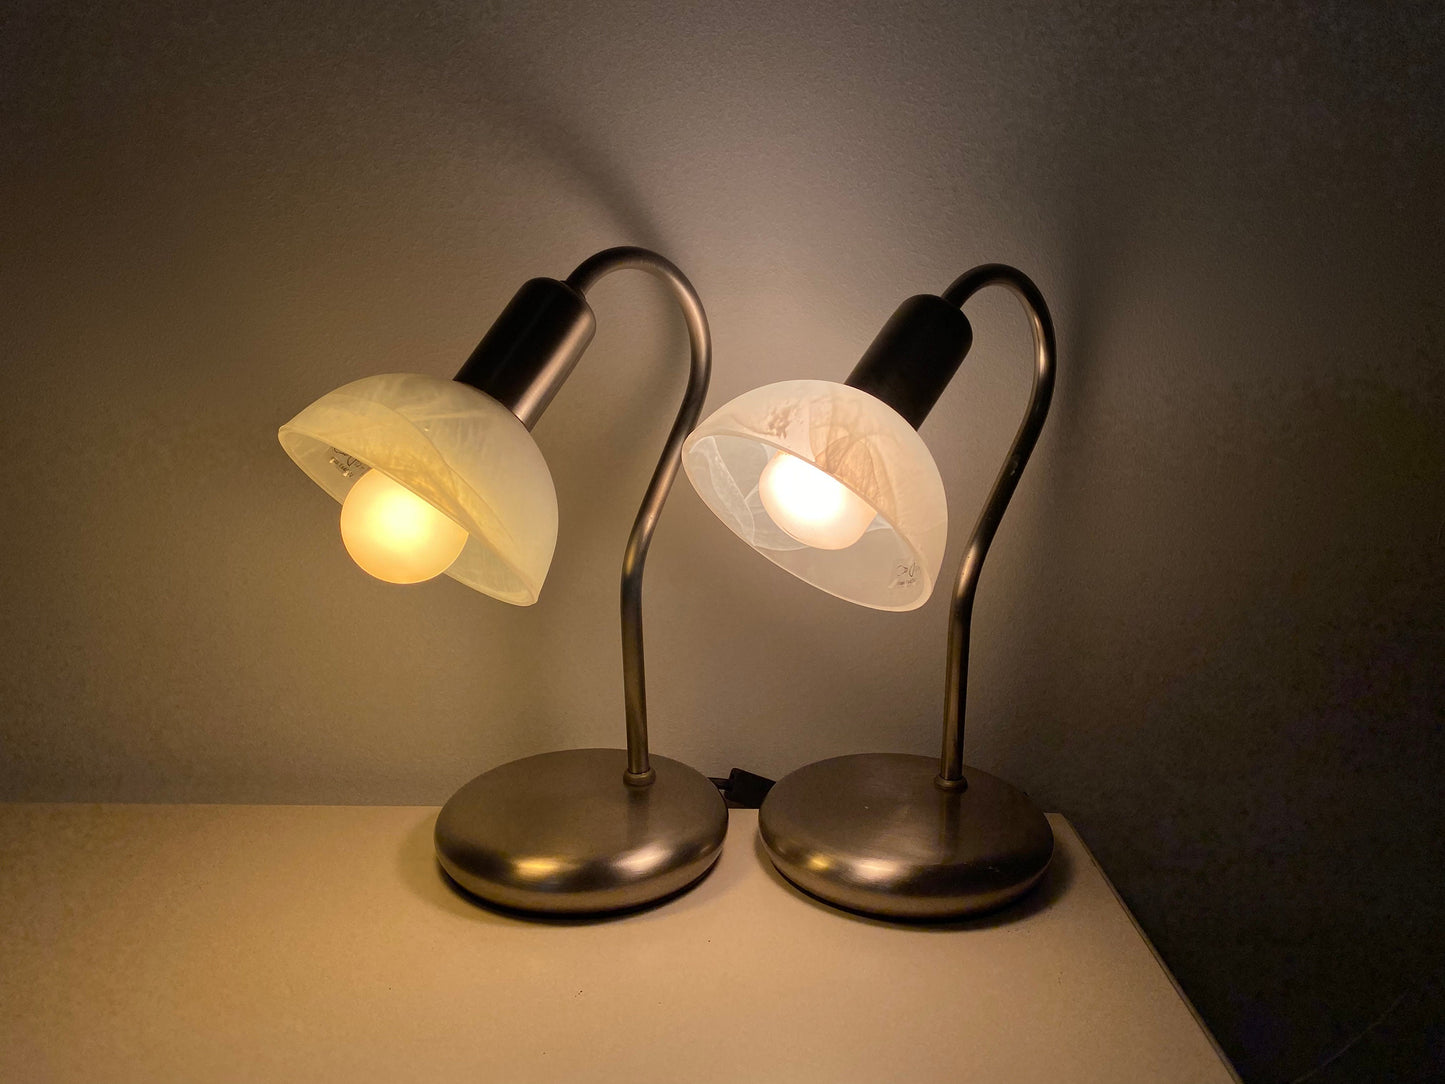 2 Retro BRILLIANT Night Lights | Brushed Chrome Metal Table Lights with Alabaster Glass Shades | Set of 2 Mid Century Night Lights 1970s